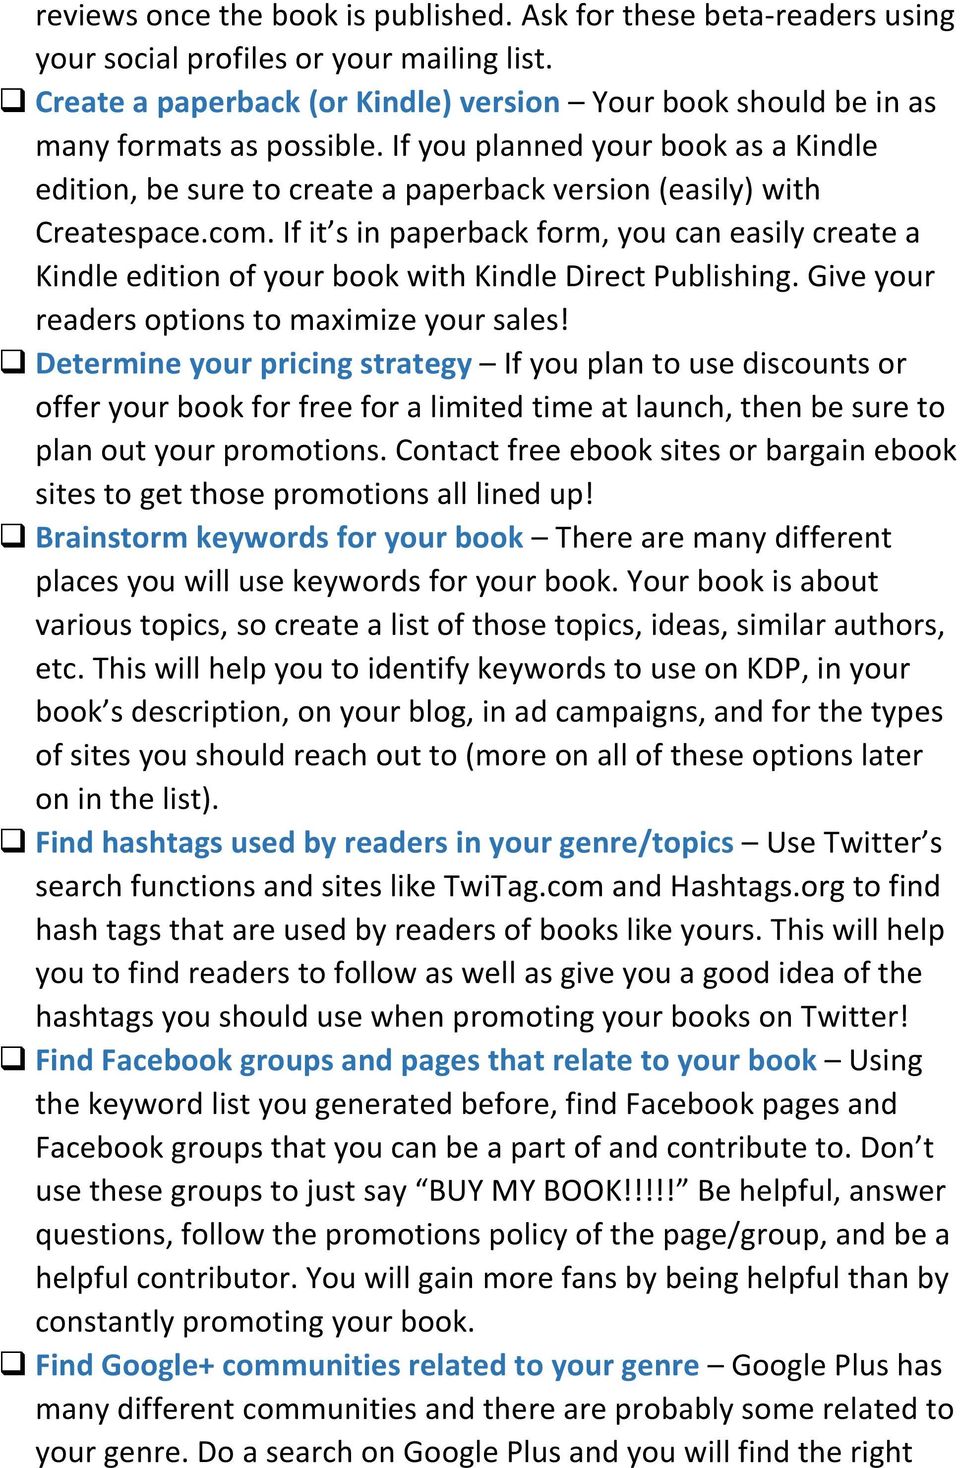 If you planned your book as a Kindle edition, be sure to create a paperback version (easily) with Createspace.com.